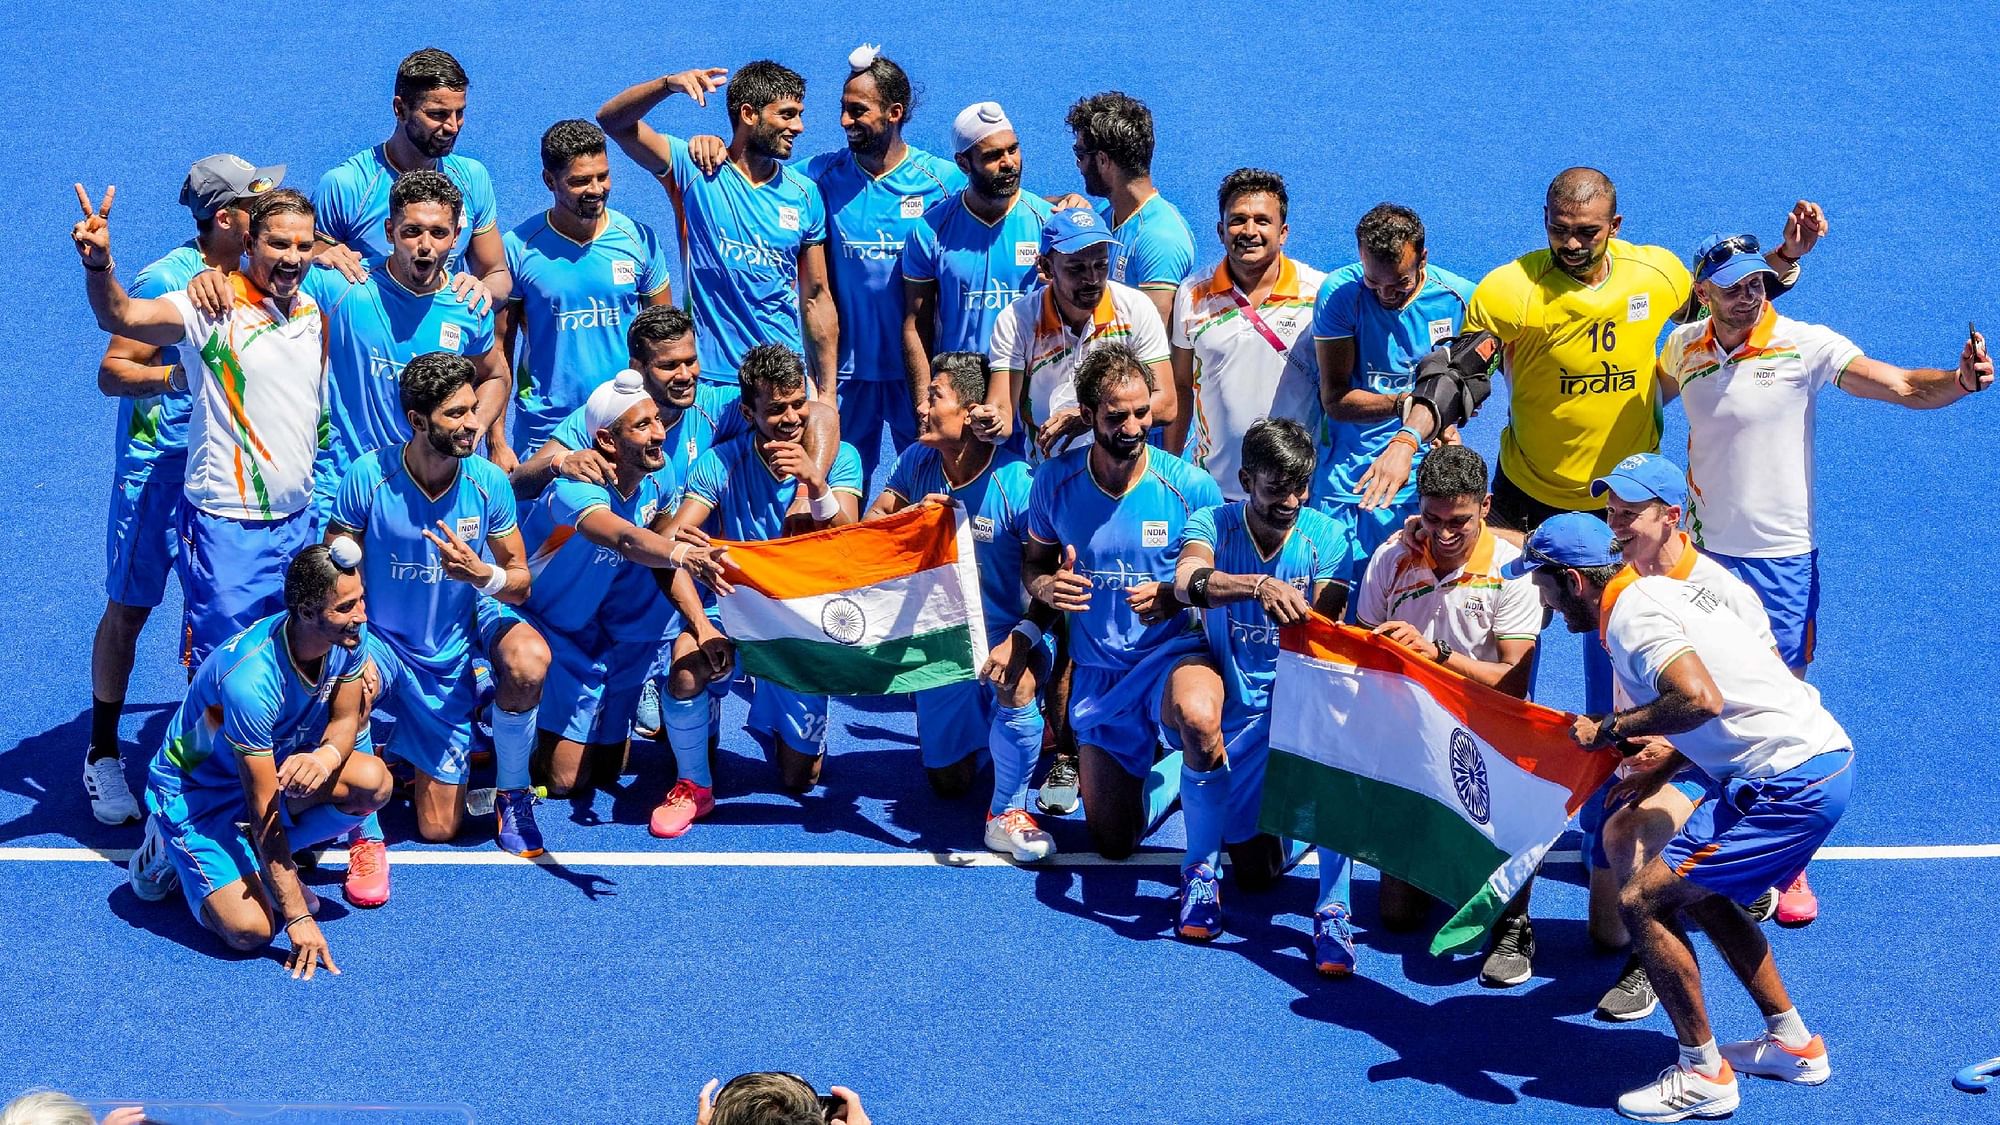 Tokyo Olympics 2020 How Can Indian Hockey Win Medals Regularly?